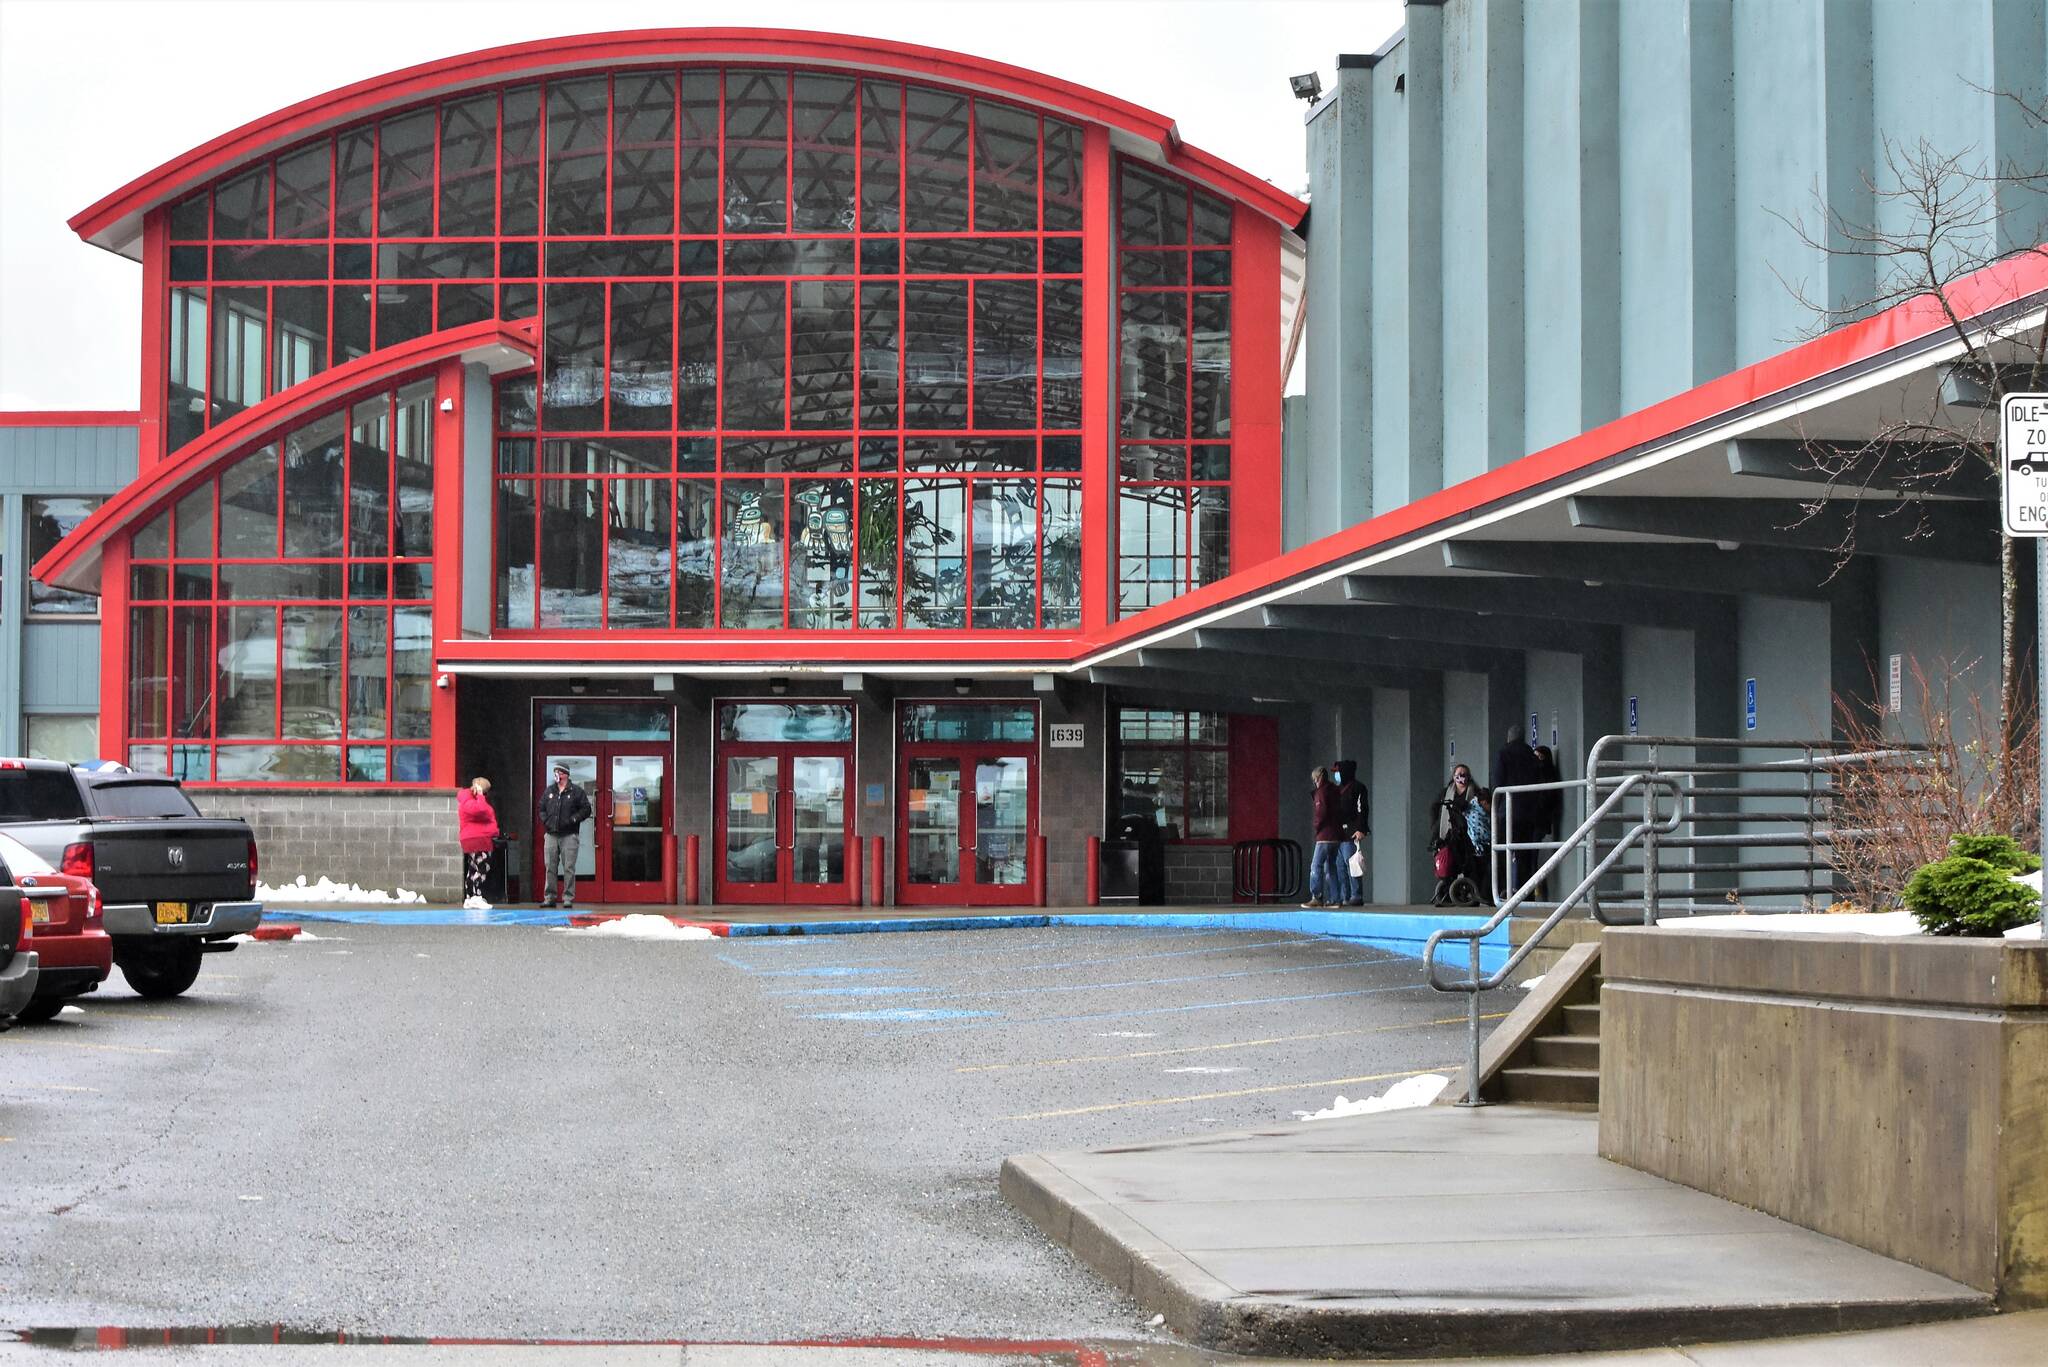 Juneau Douglas High School: Yadaa.at Kale, pictured here in November 2020. The school board's decision to prevent the basketball team from going to the Region V state tournament because of a district policy precluded traveling to regions with high levels of coronavirus risk is one of the issues that prompted Kyle Scholl to run as a write-in candidate. (Peter Segall / Juneau Empire File)